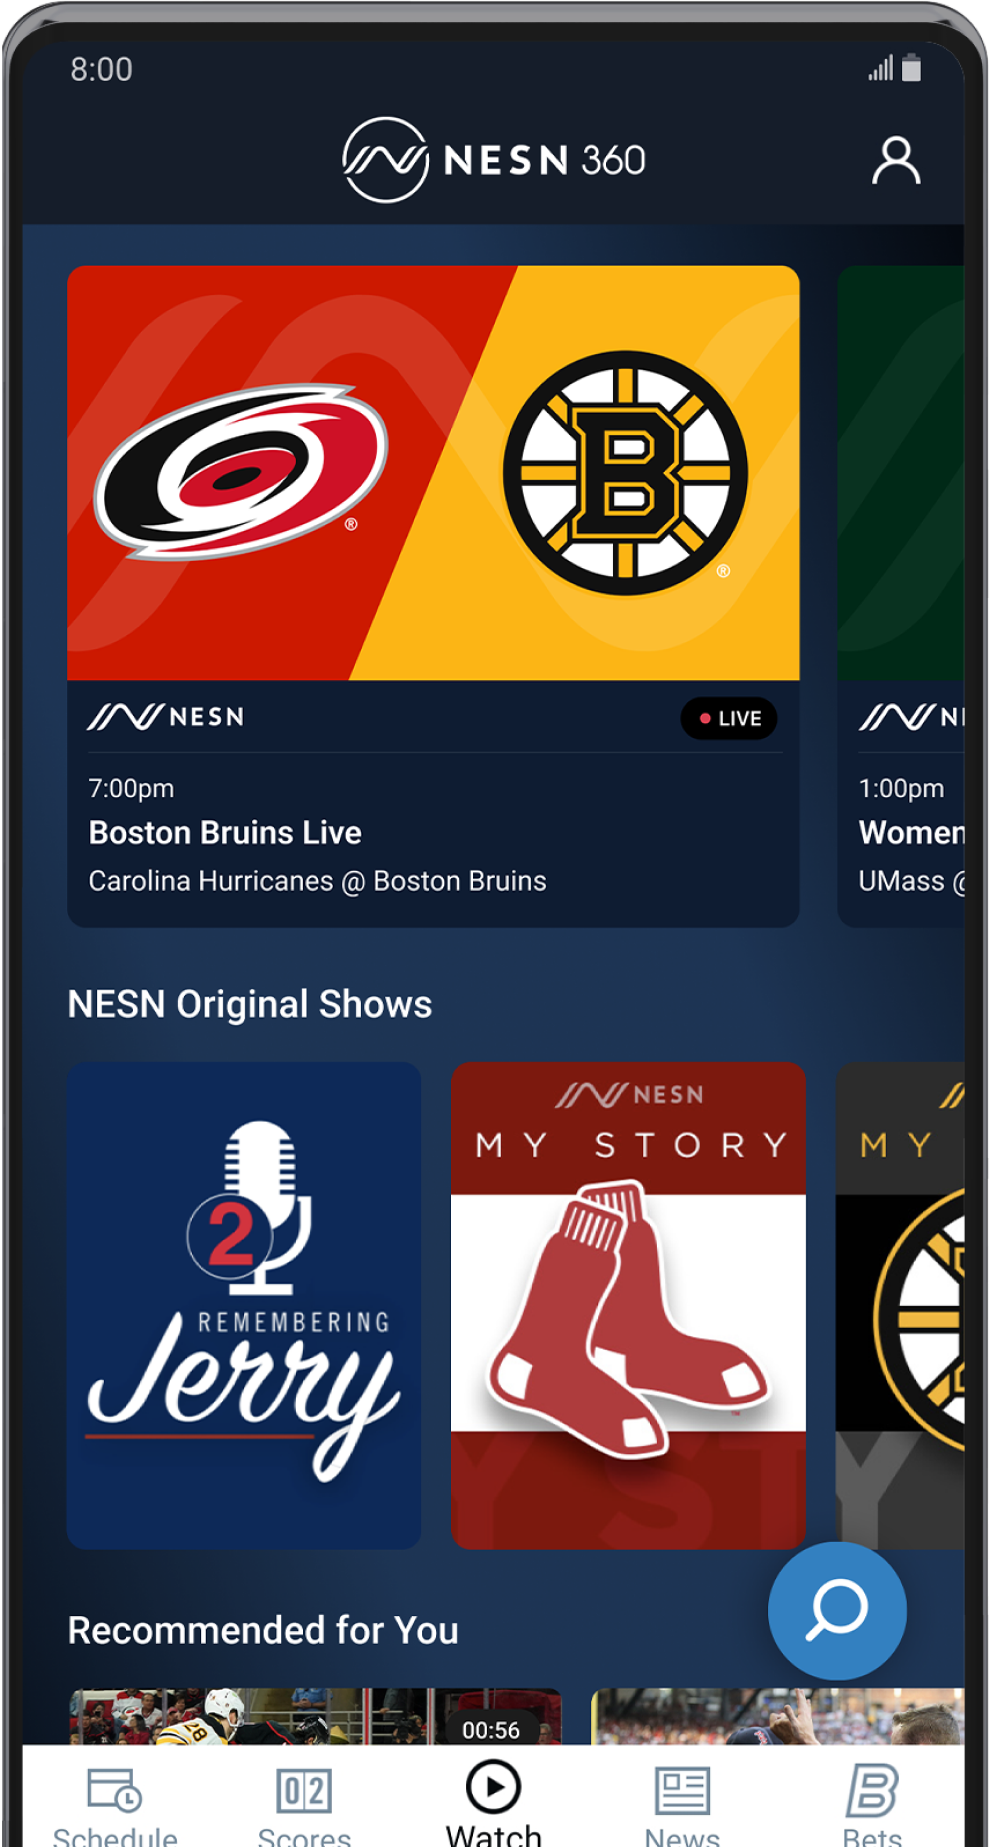 NESN Becomes First RSN To Launch DTC Streaming Service With NESN 360